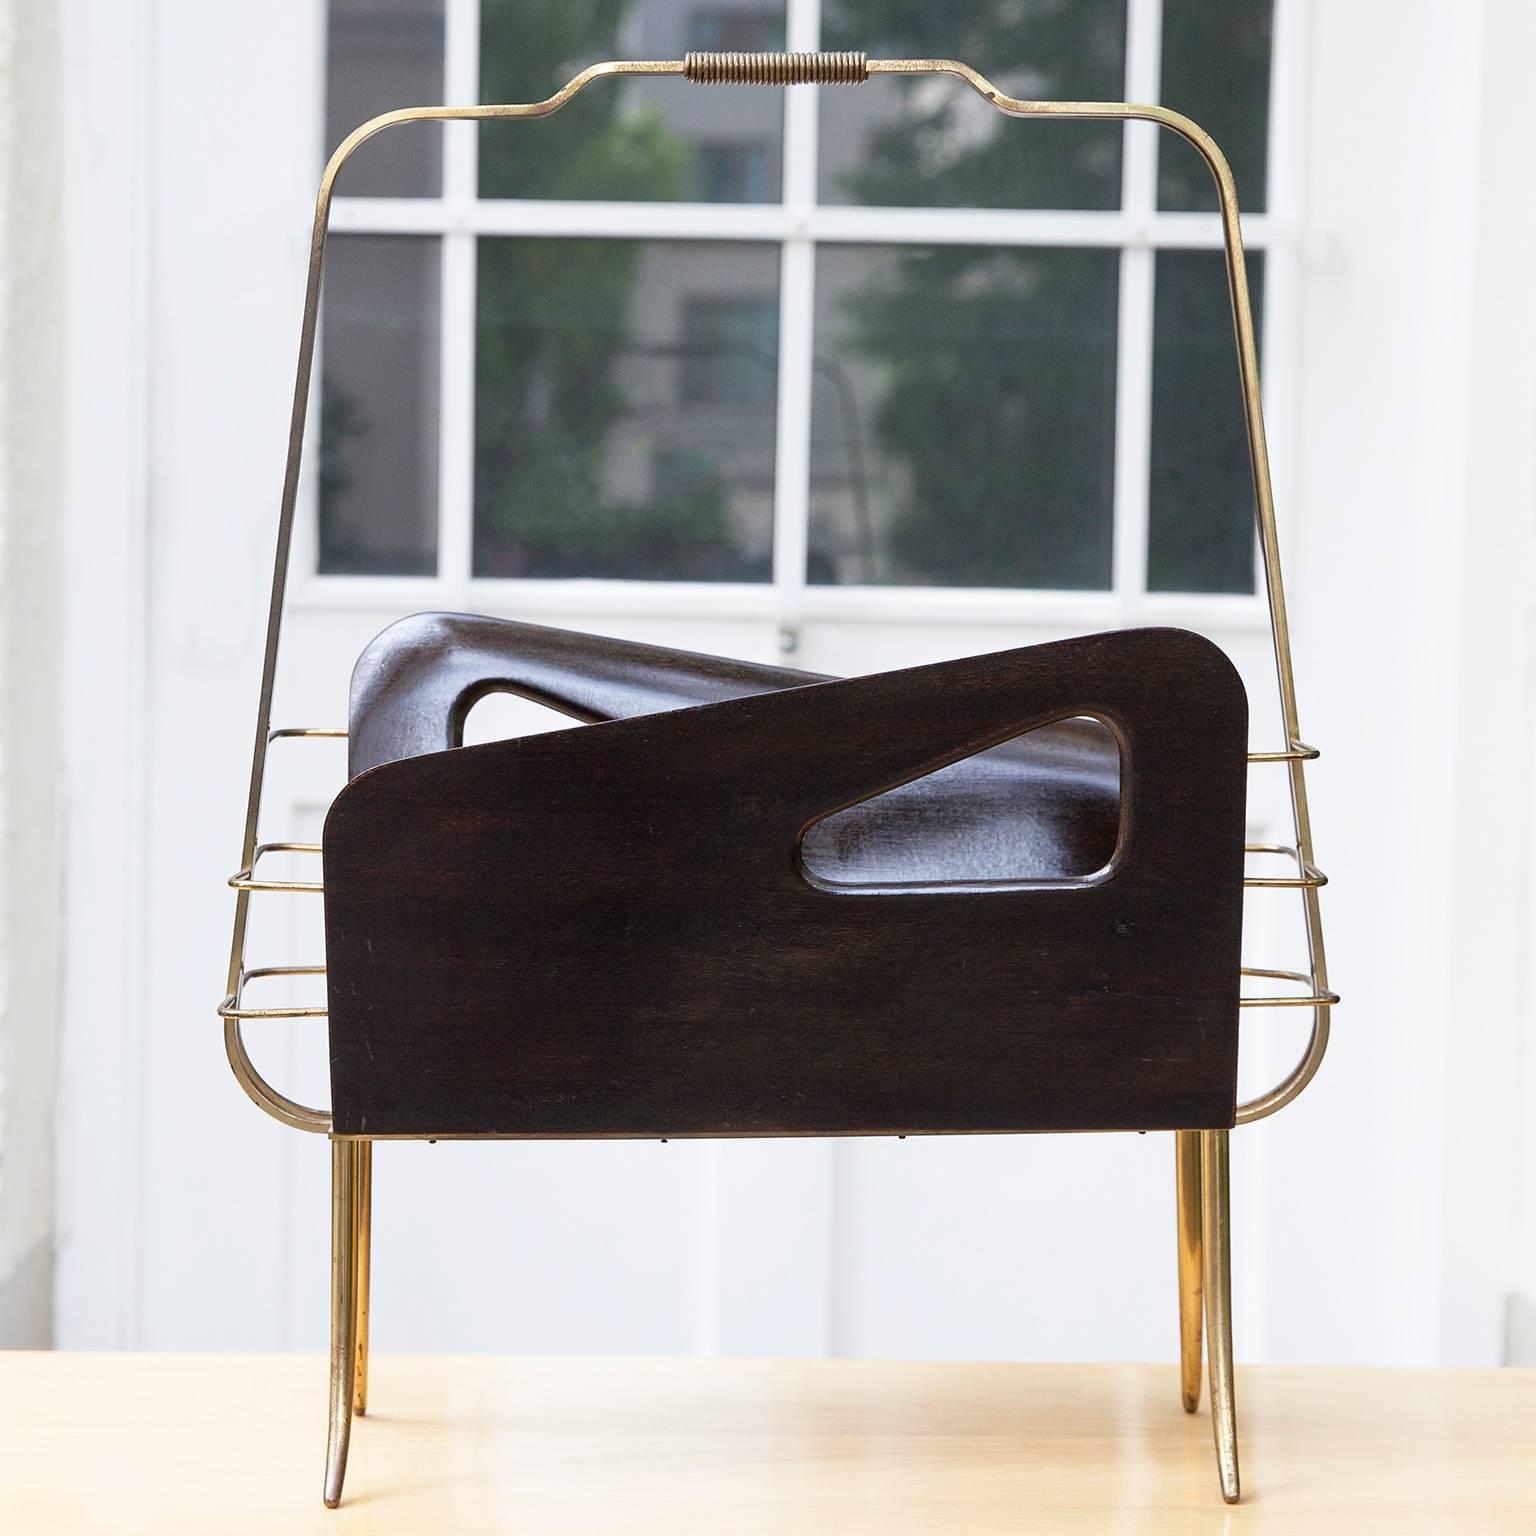 Gorgeous 1950s Italian magazine stand made of brass and walnut with geometric cutouts and sharply planed edges.
The maker is making an obvious salute to the organized wall creations of Gio Ponti in the 1950s.
H 61 W 47 D 20 cm.
   